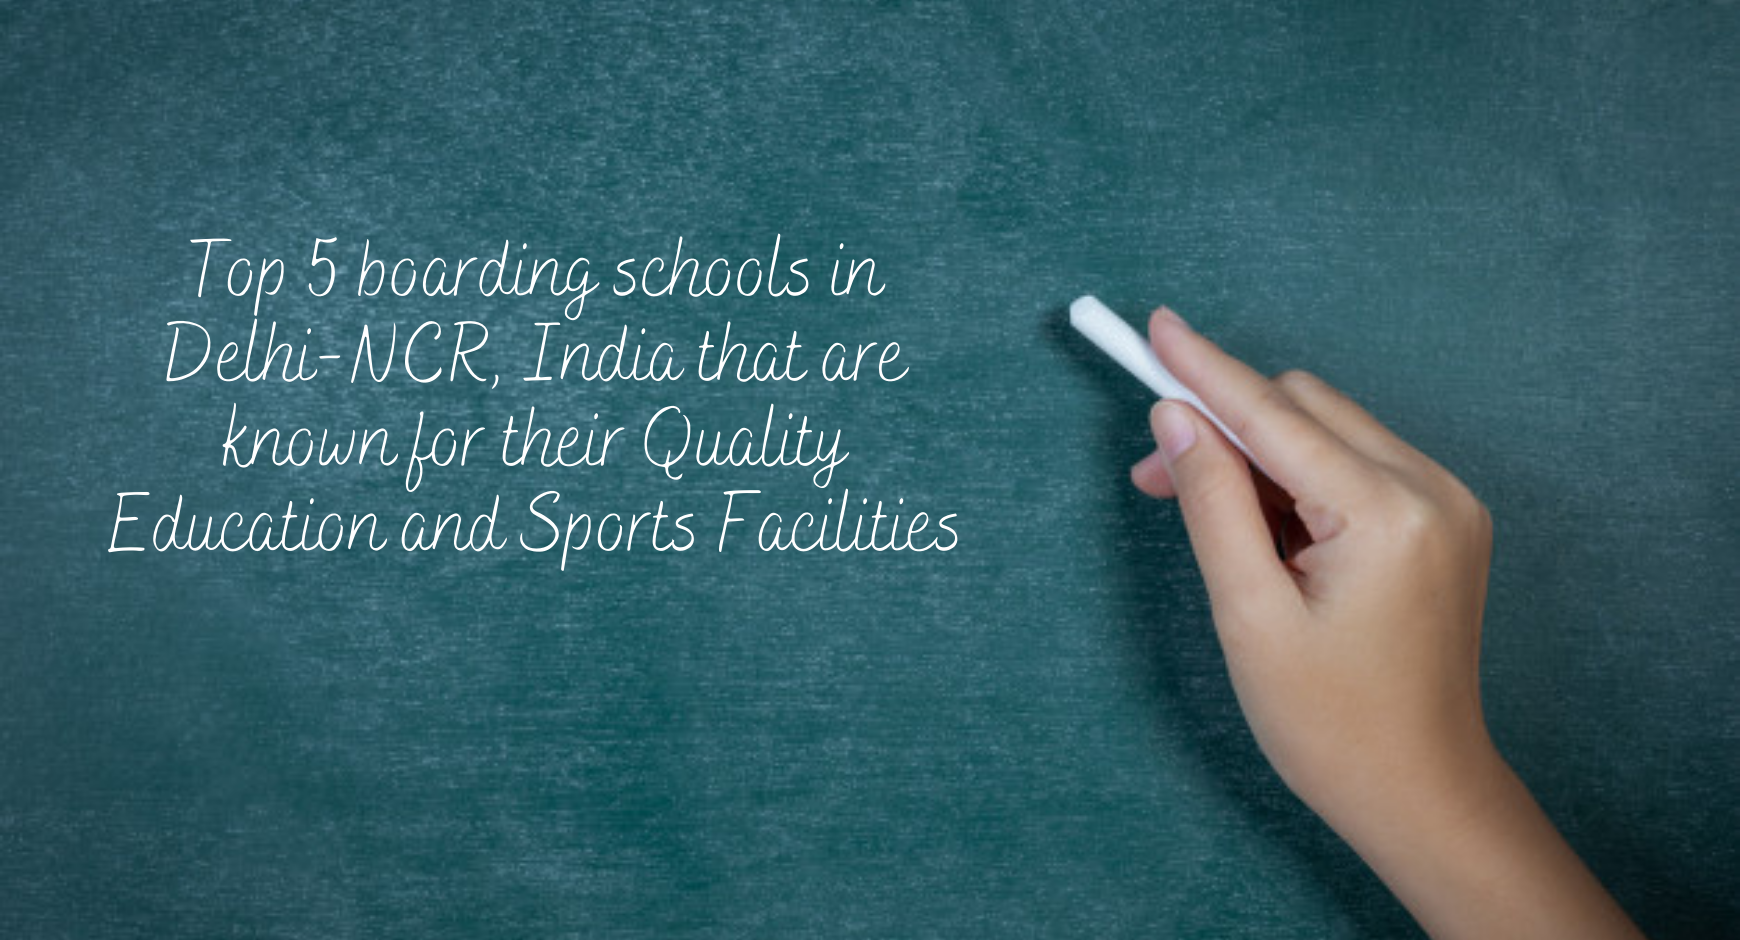 Top 5 boarding schools in Delhi-NCR, India that are known for their Quality Education and Sports Facilities 